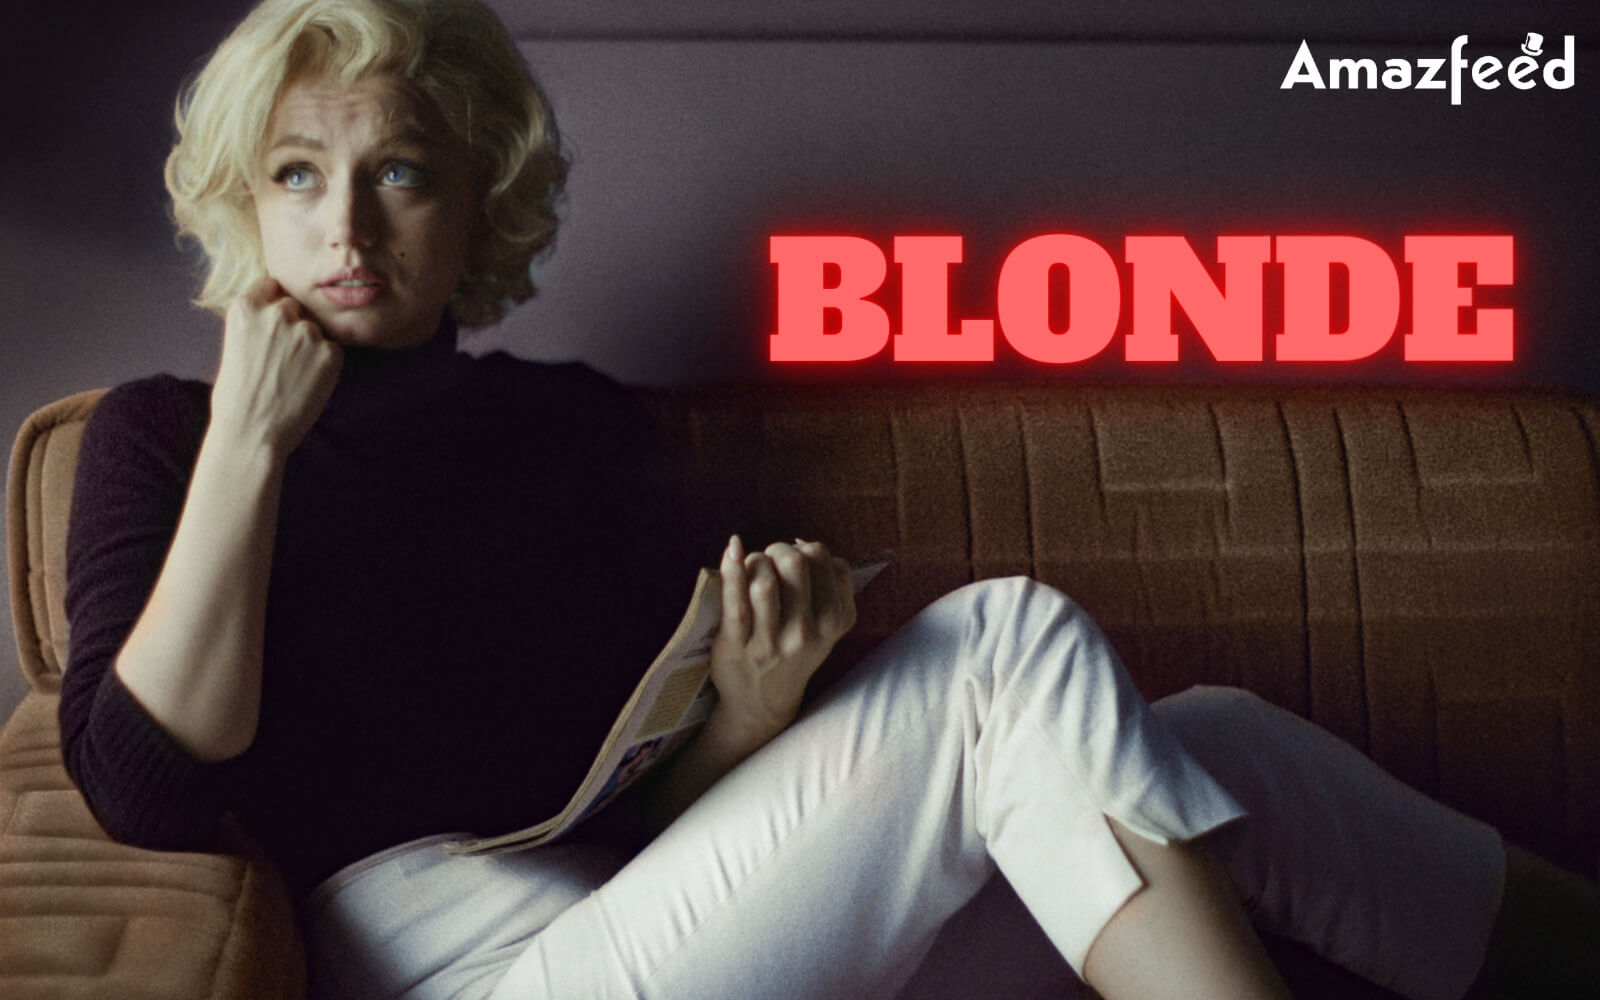 When Is Blonde Coming Out (Release Date)